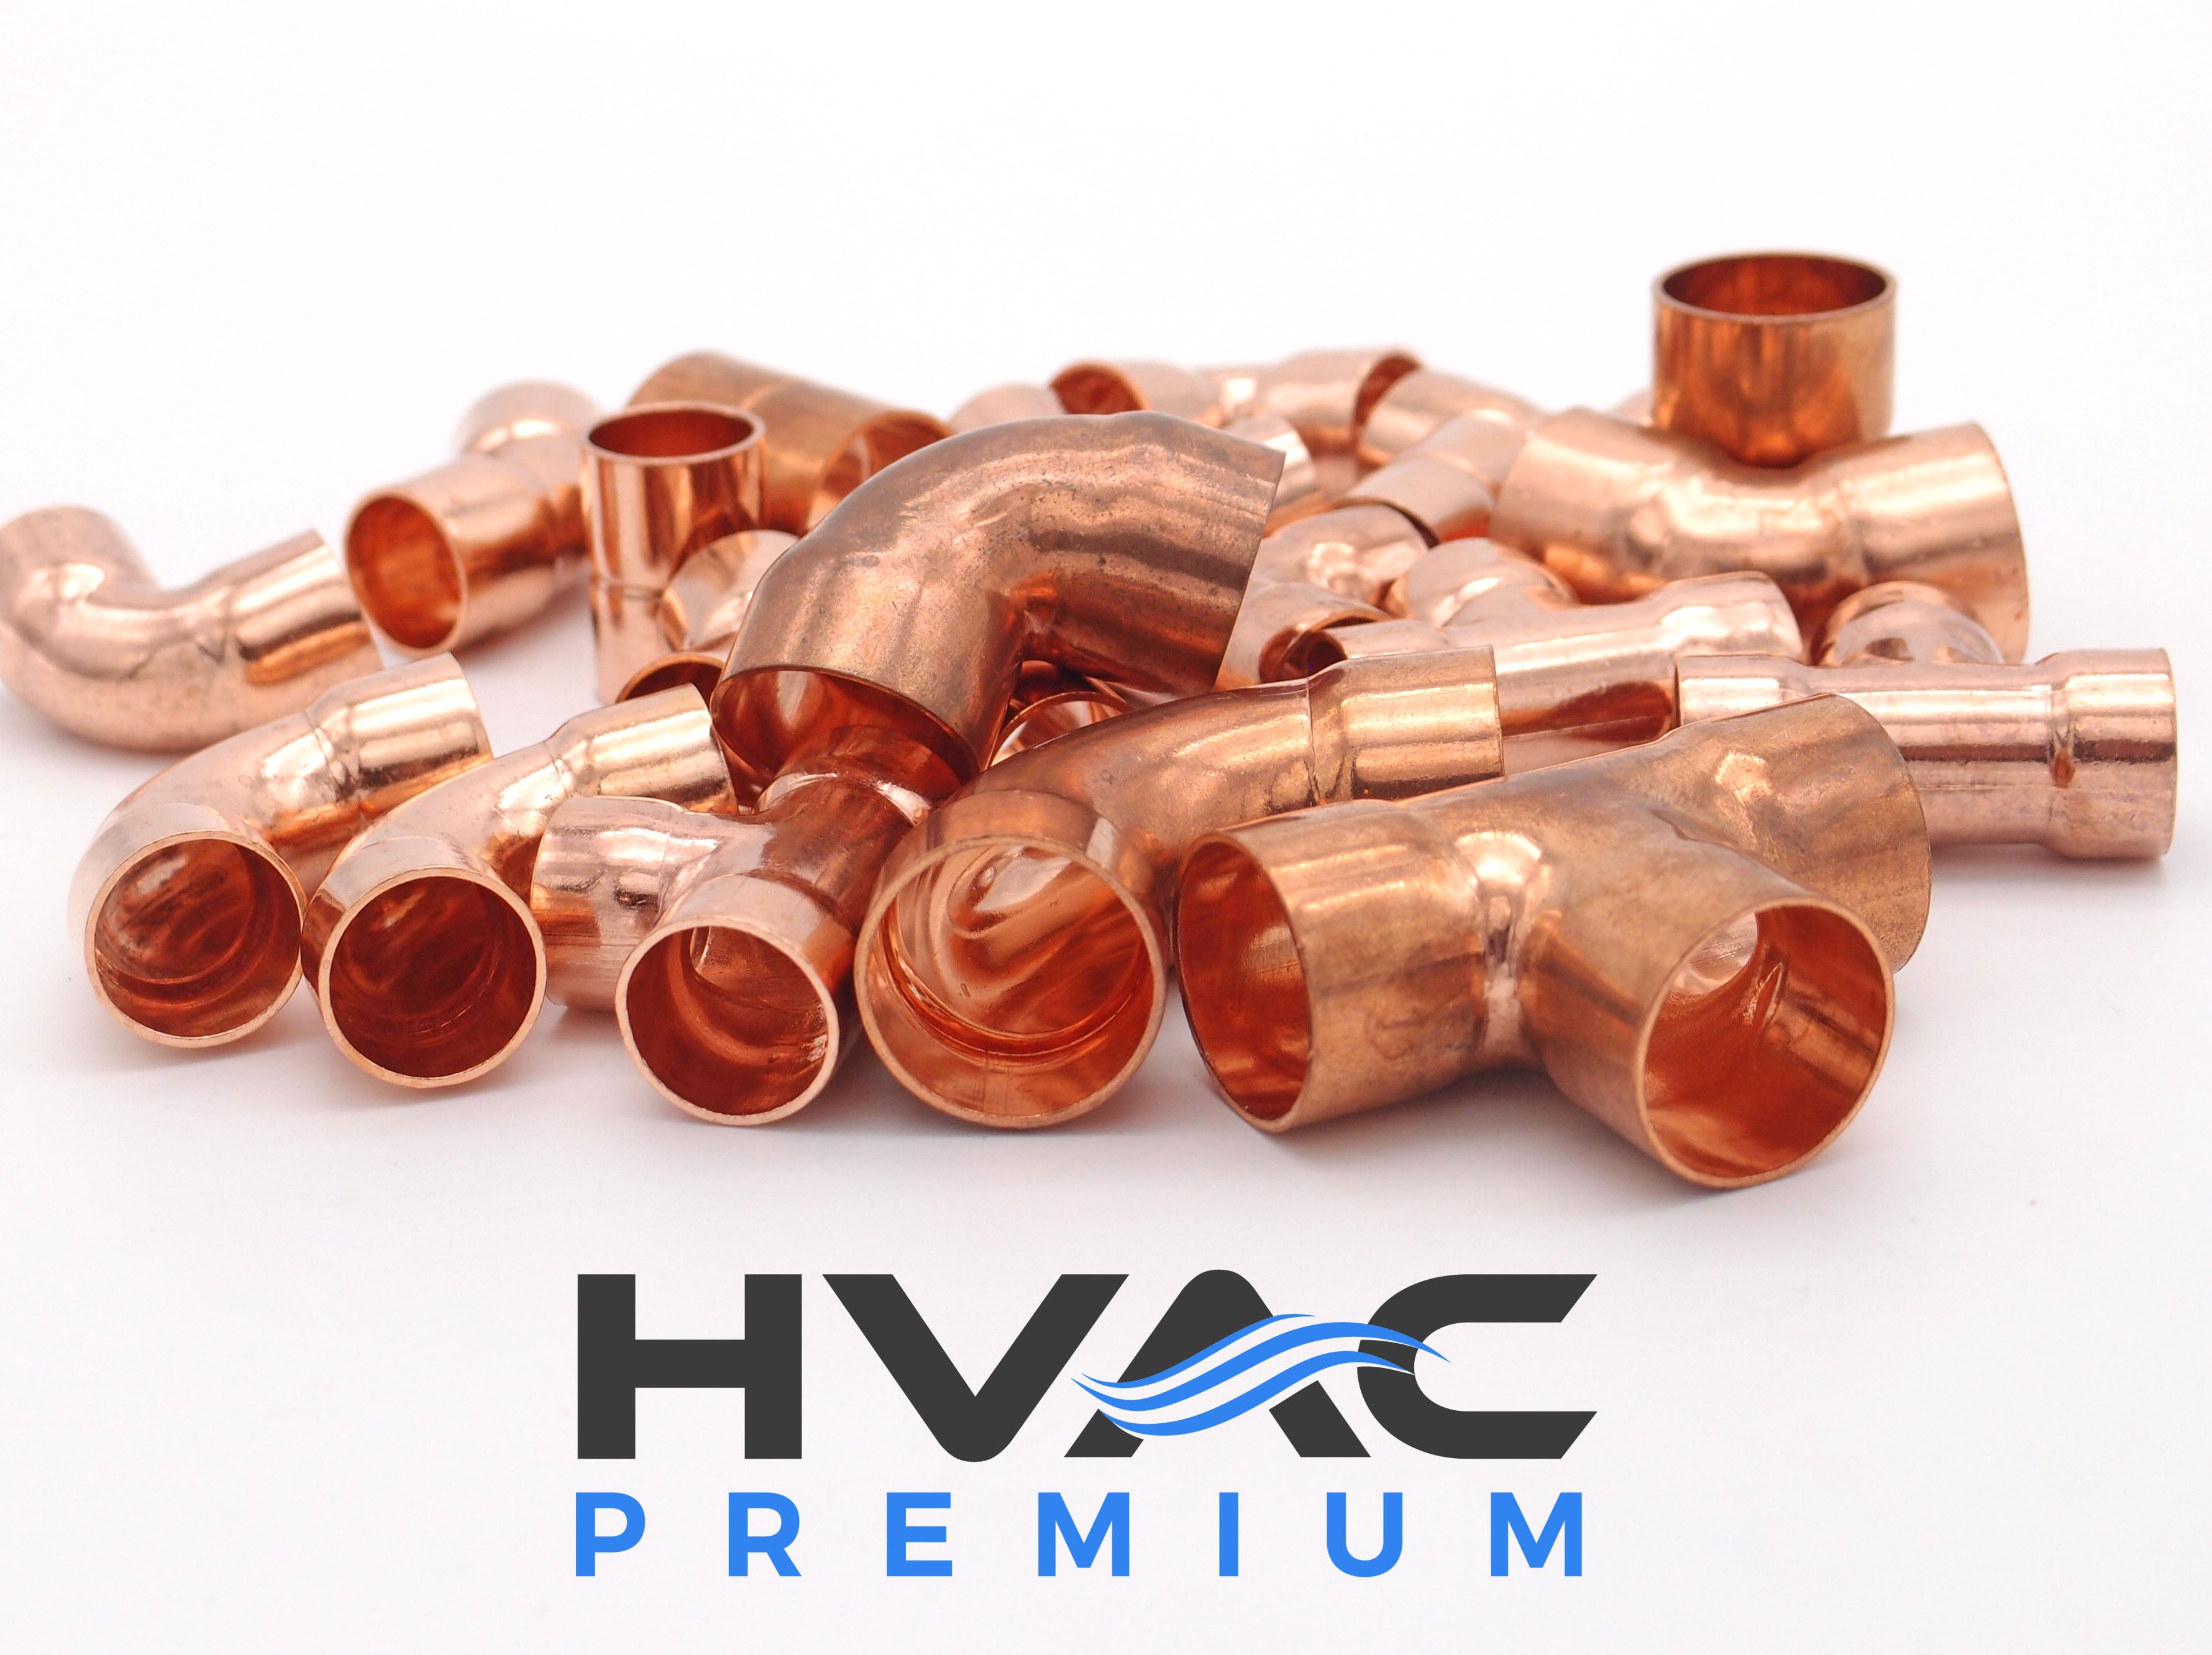 Copper Fitting 1-1/8 to 7/8 (HVAC Dimensions) Reducer / Increaser Copper Coupling & HVAC – 1 to 3/4 (Plumbing Inner Dimensions) 99.9% Pure Copper - 10 Pack